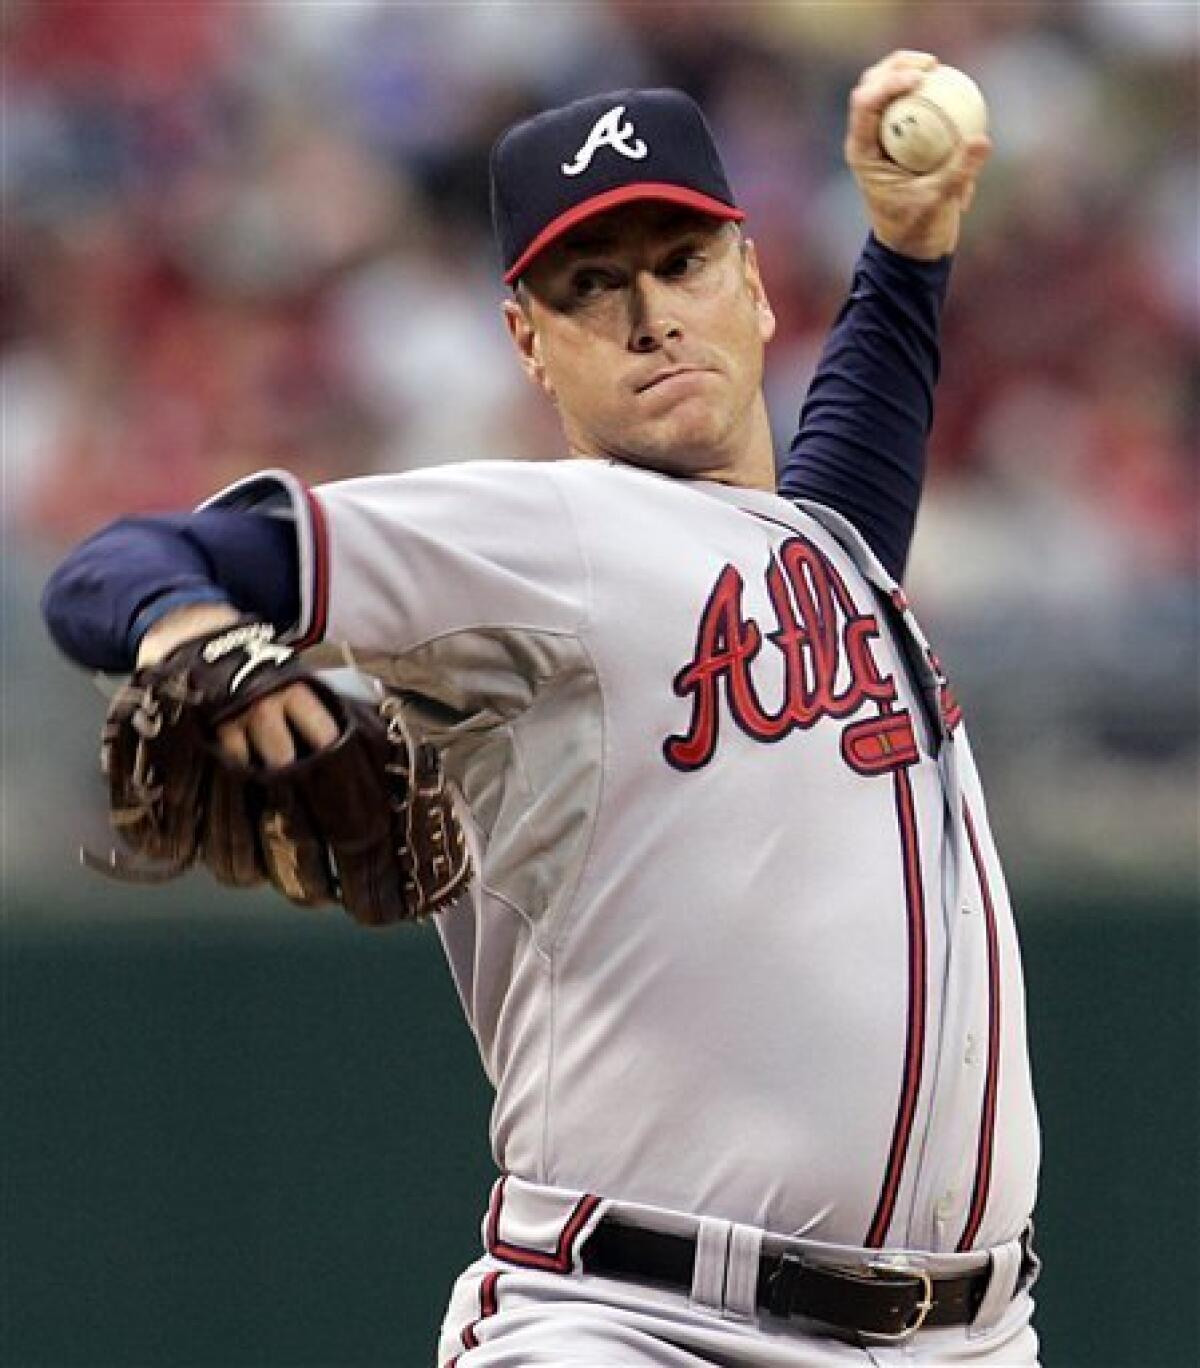 Glavine returns to Braves in new role as 5th man - The San Diego